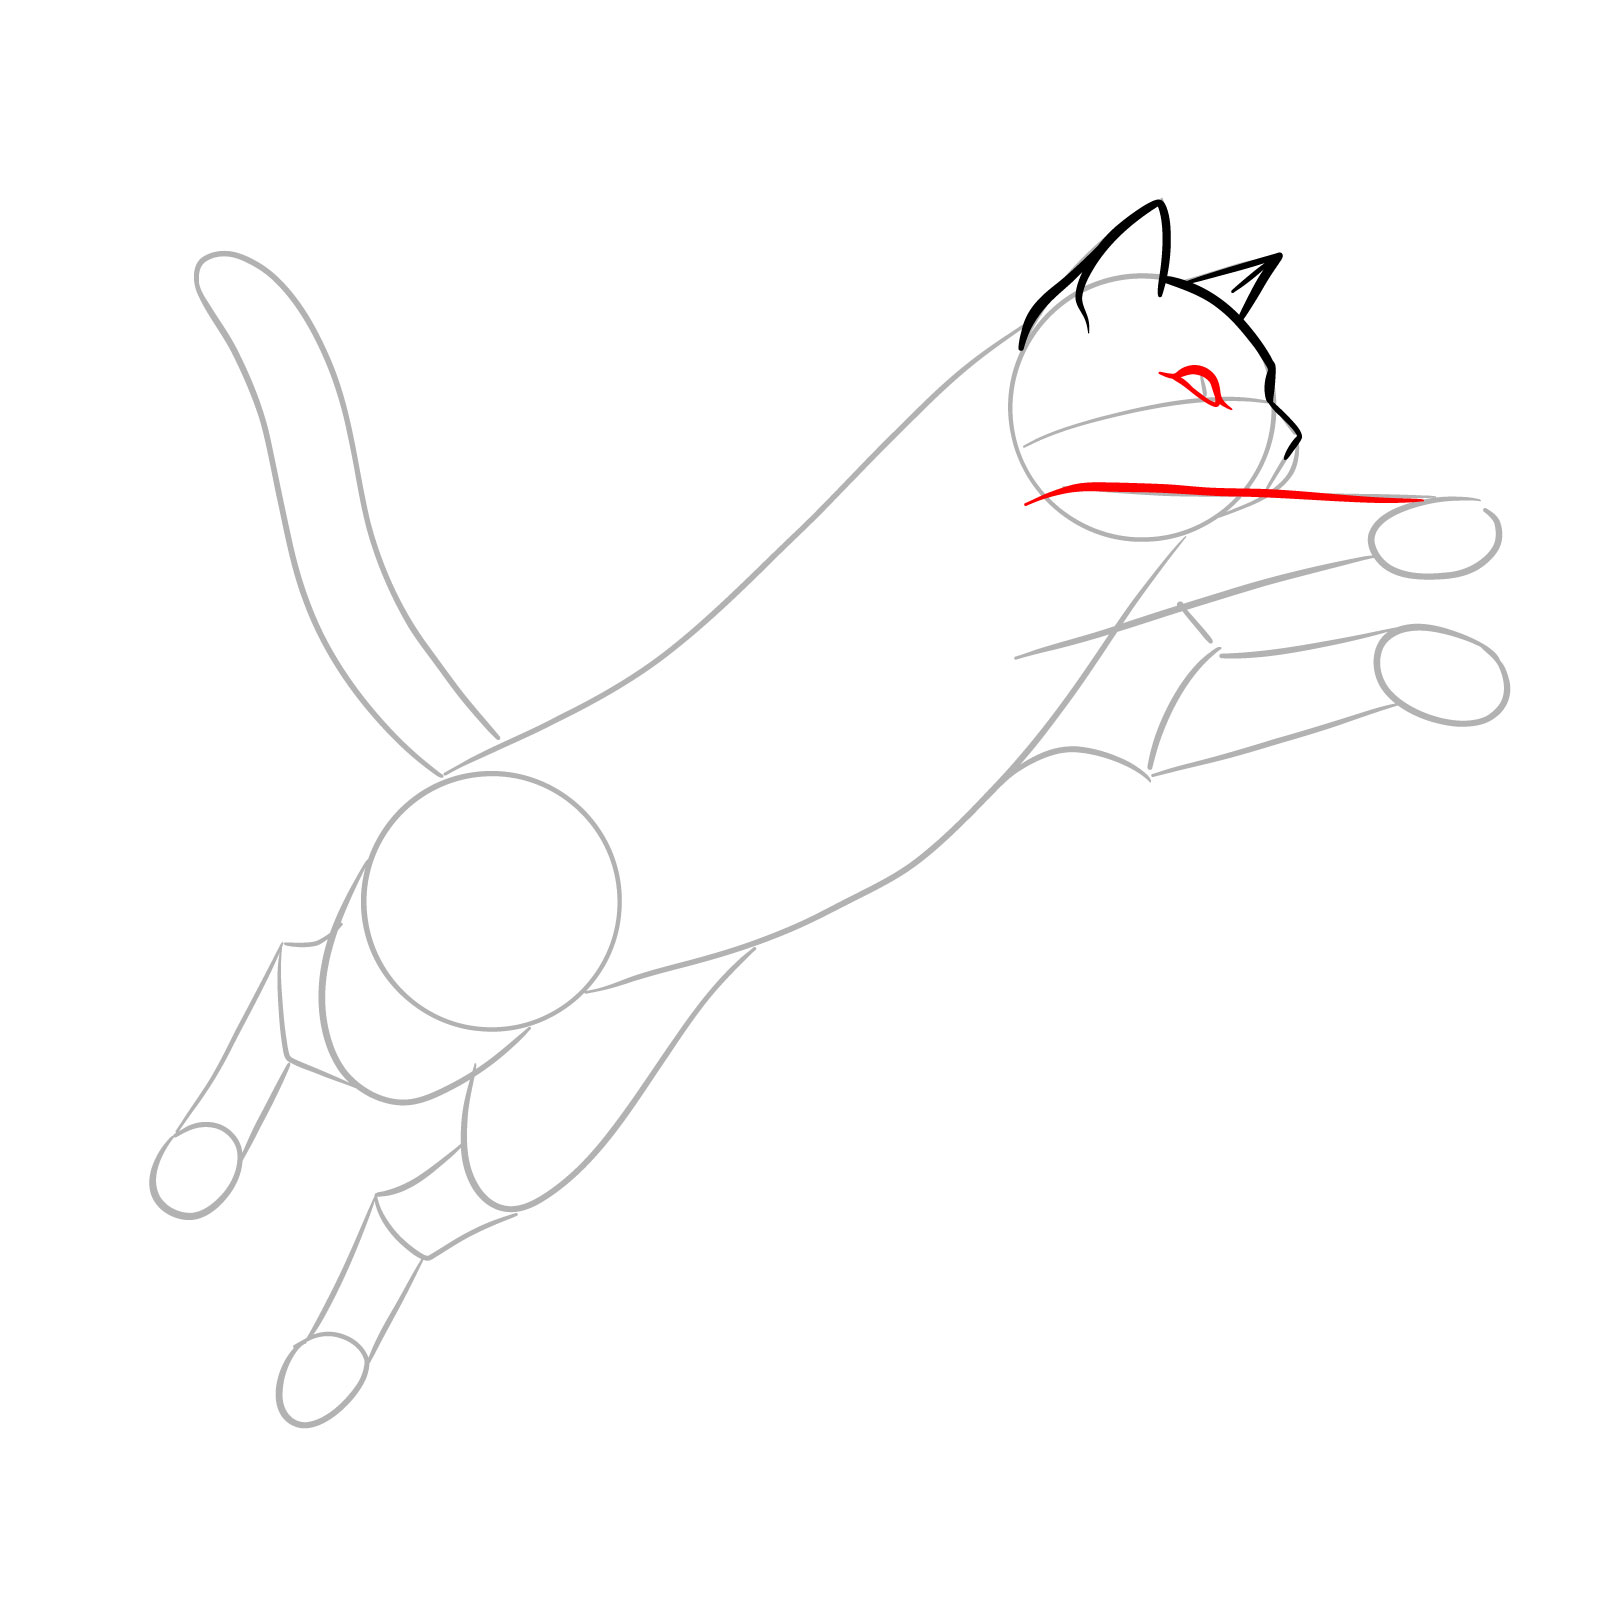 Illustration of a cat in mid-jump with the eye outline and the upper leg line sketched in - step 05